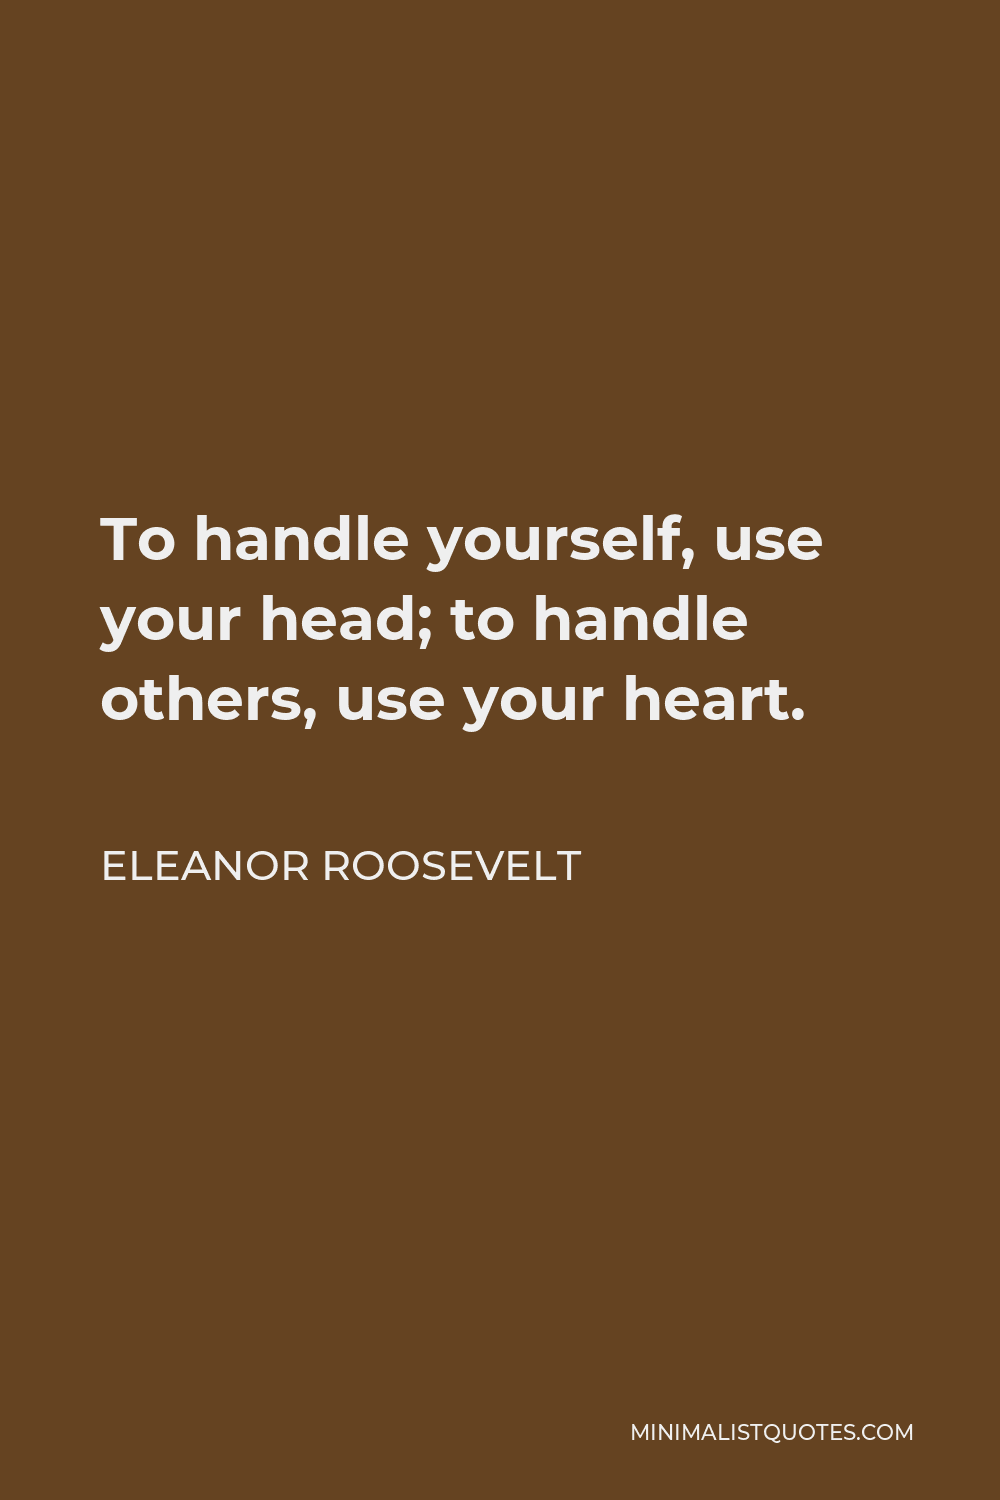 Eleanor Roosevelt Quote - To handle yourself, use your head; to handle others, use your heart.